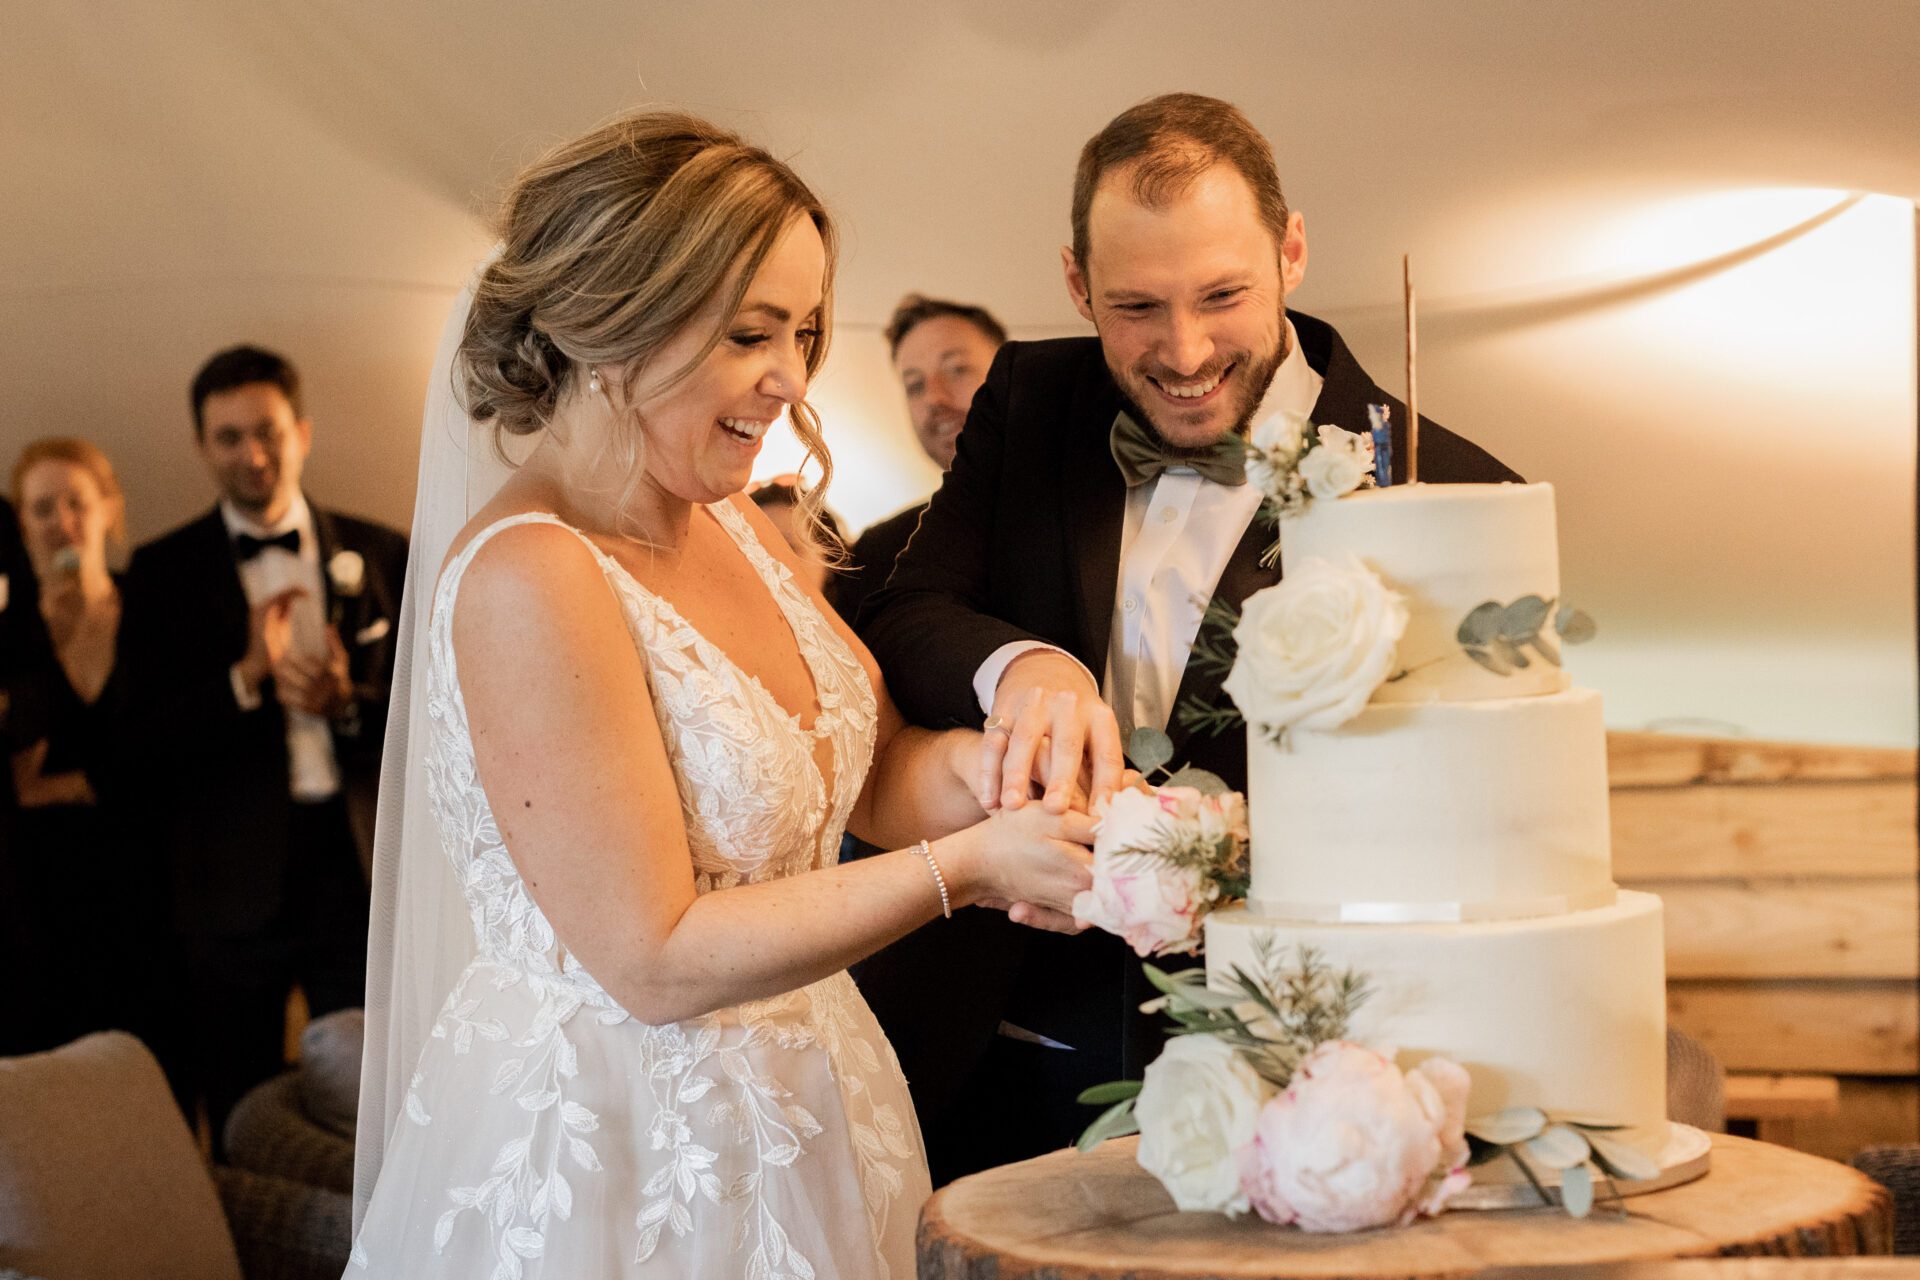 The bride and groom cut their cake at Old Luxters Barn wedding venue in Oxfordshire